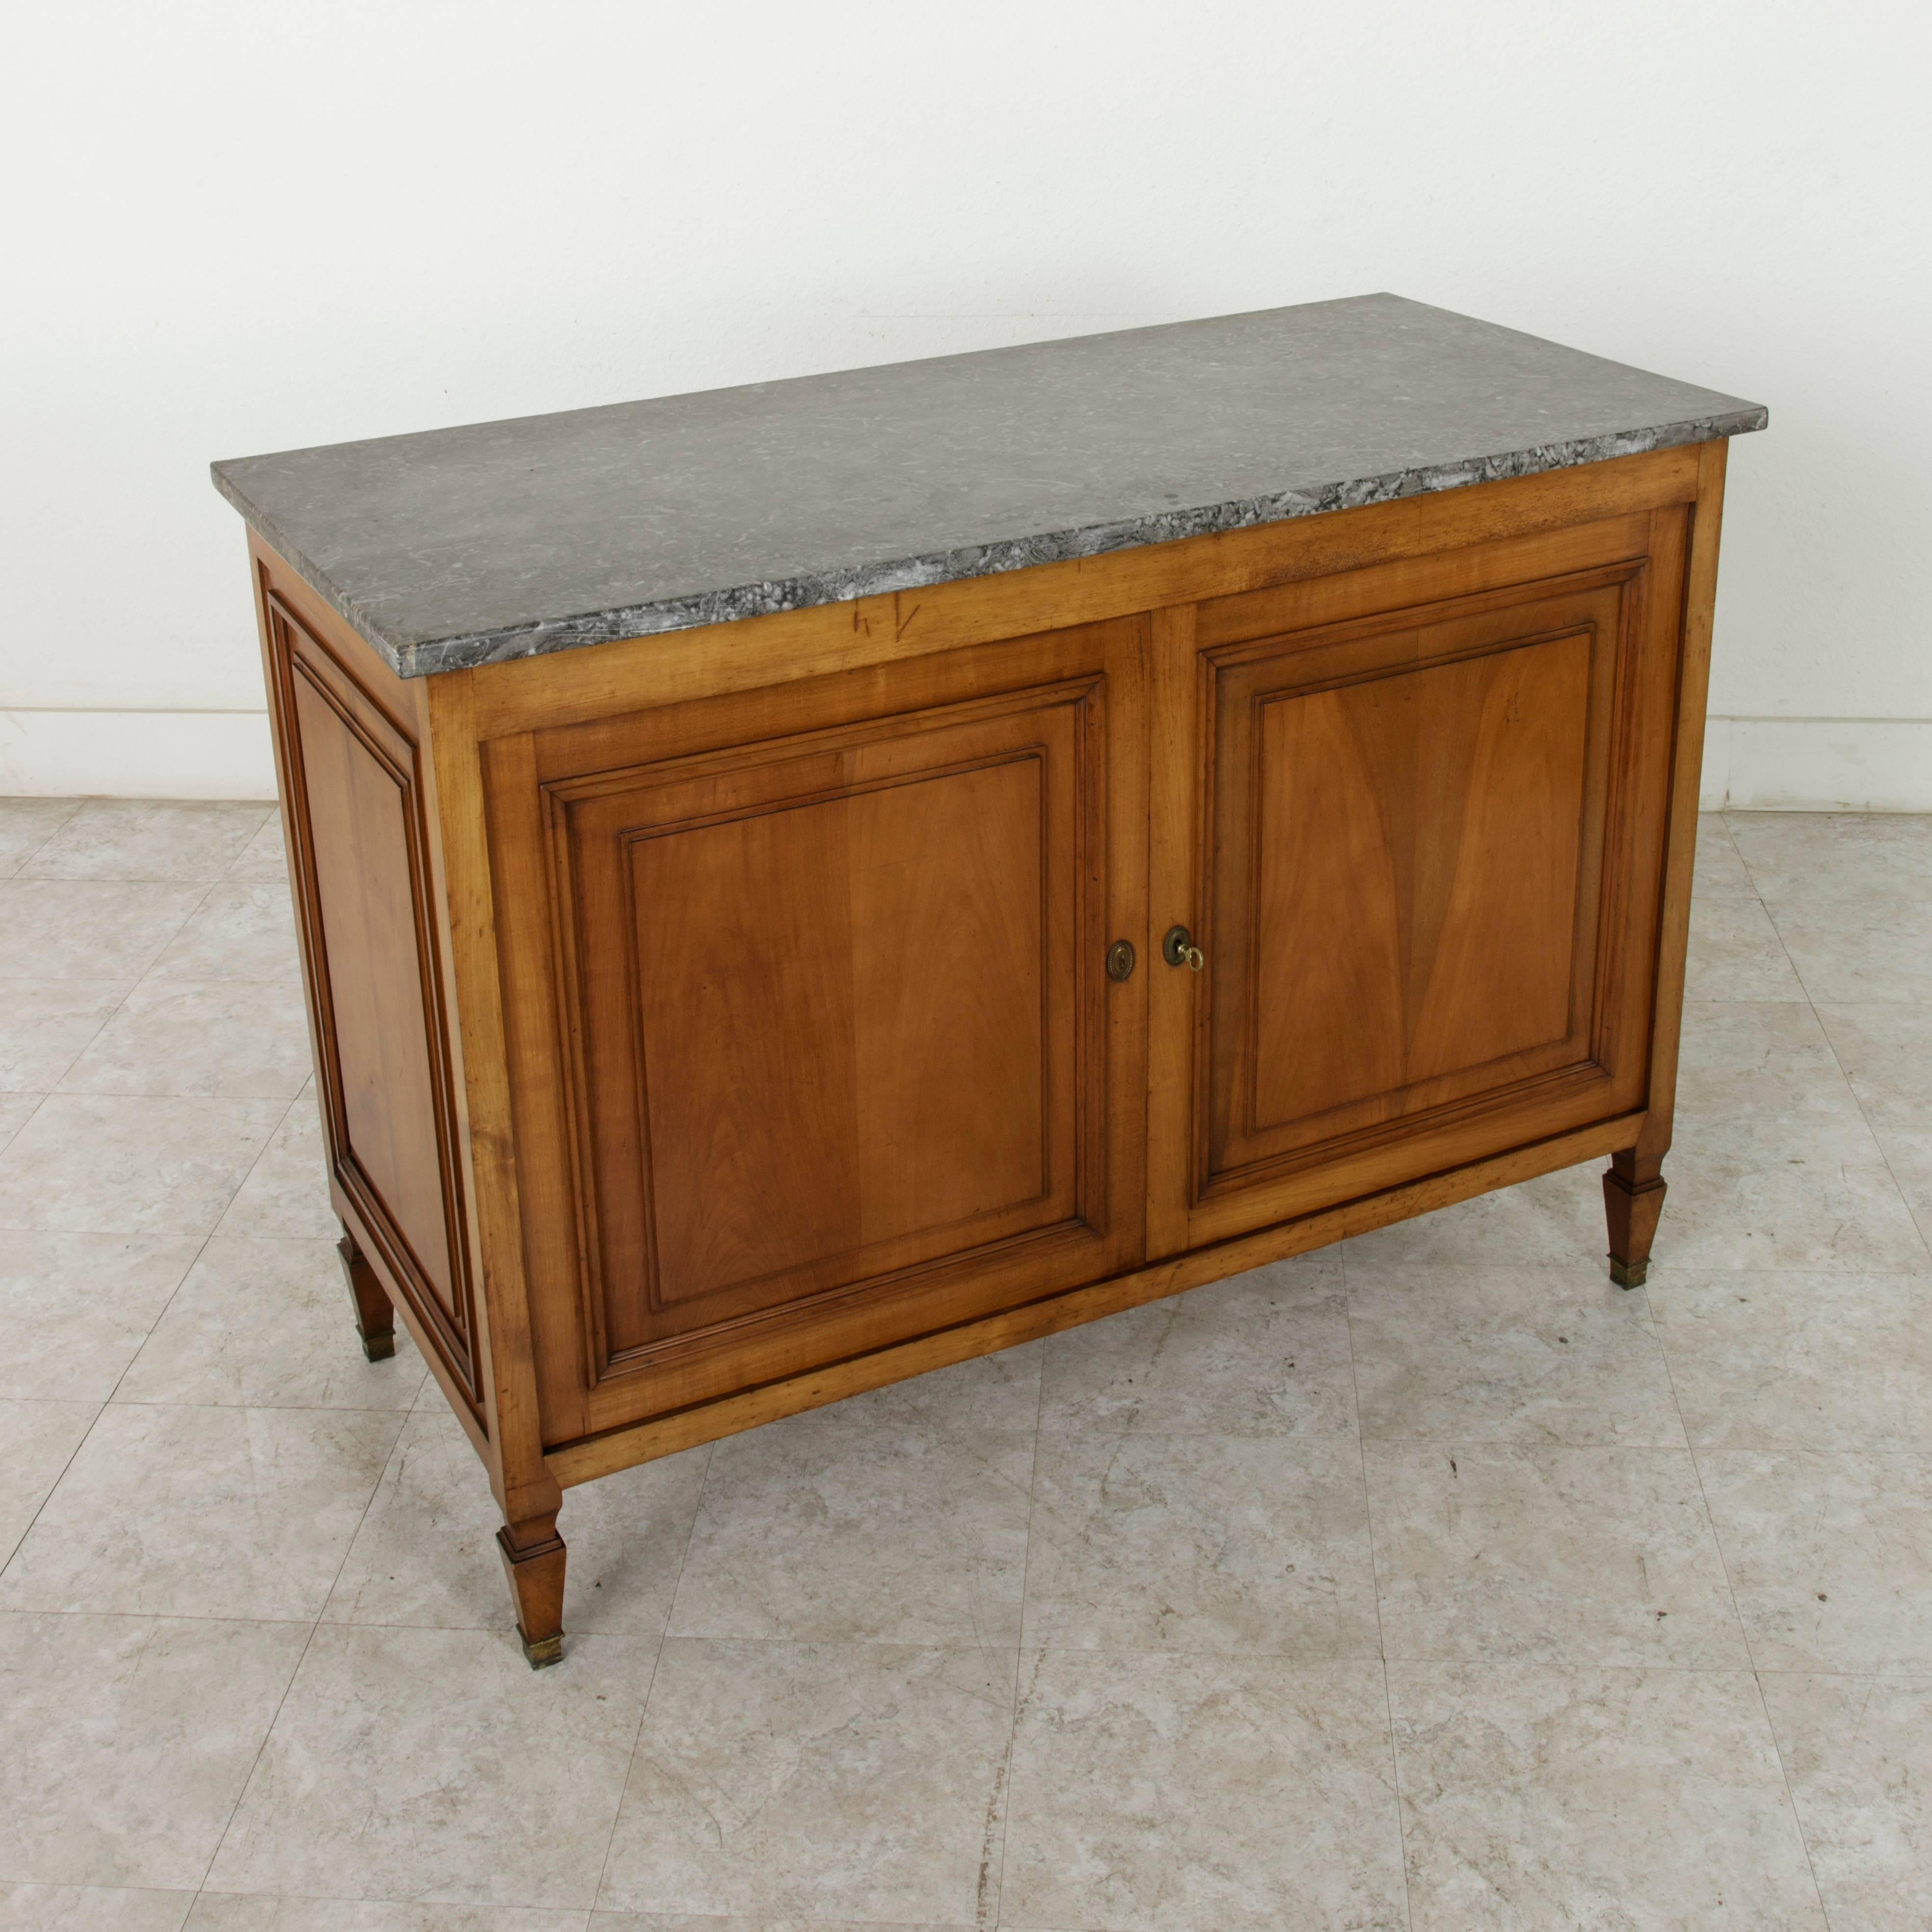 This circa 1900 French cherrywood Directoire style buffet rests on tapered feet finished with bronze sabots. It features raised panelled sides and two doors that open wide to reveal an interior with a single shelf and two drawers. The right hand